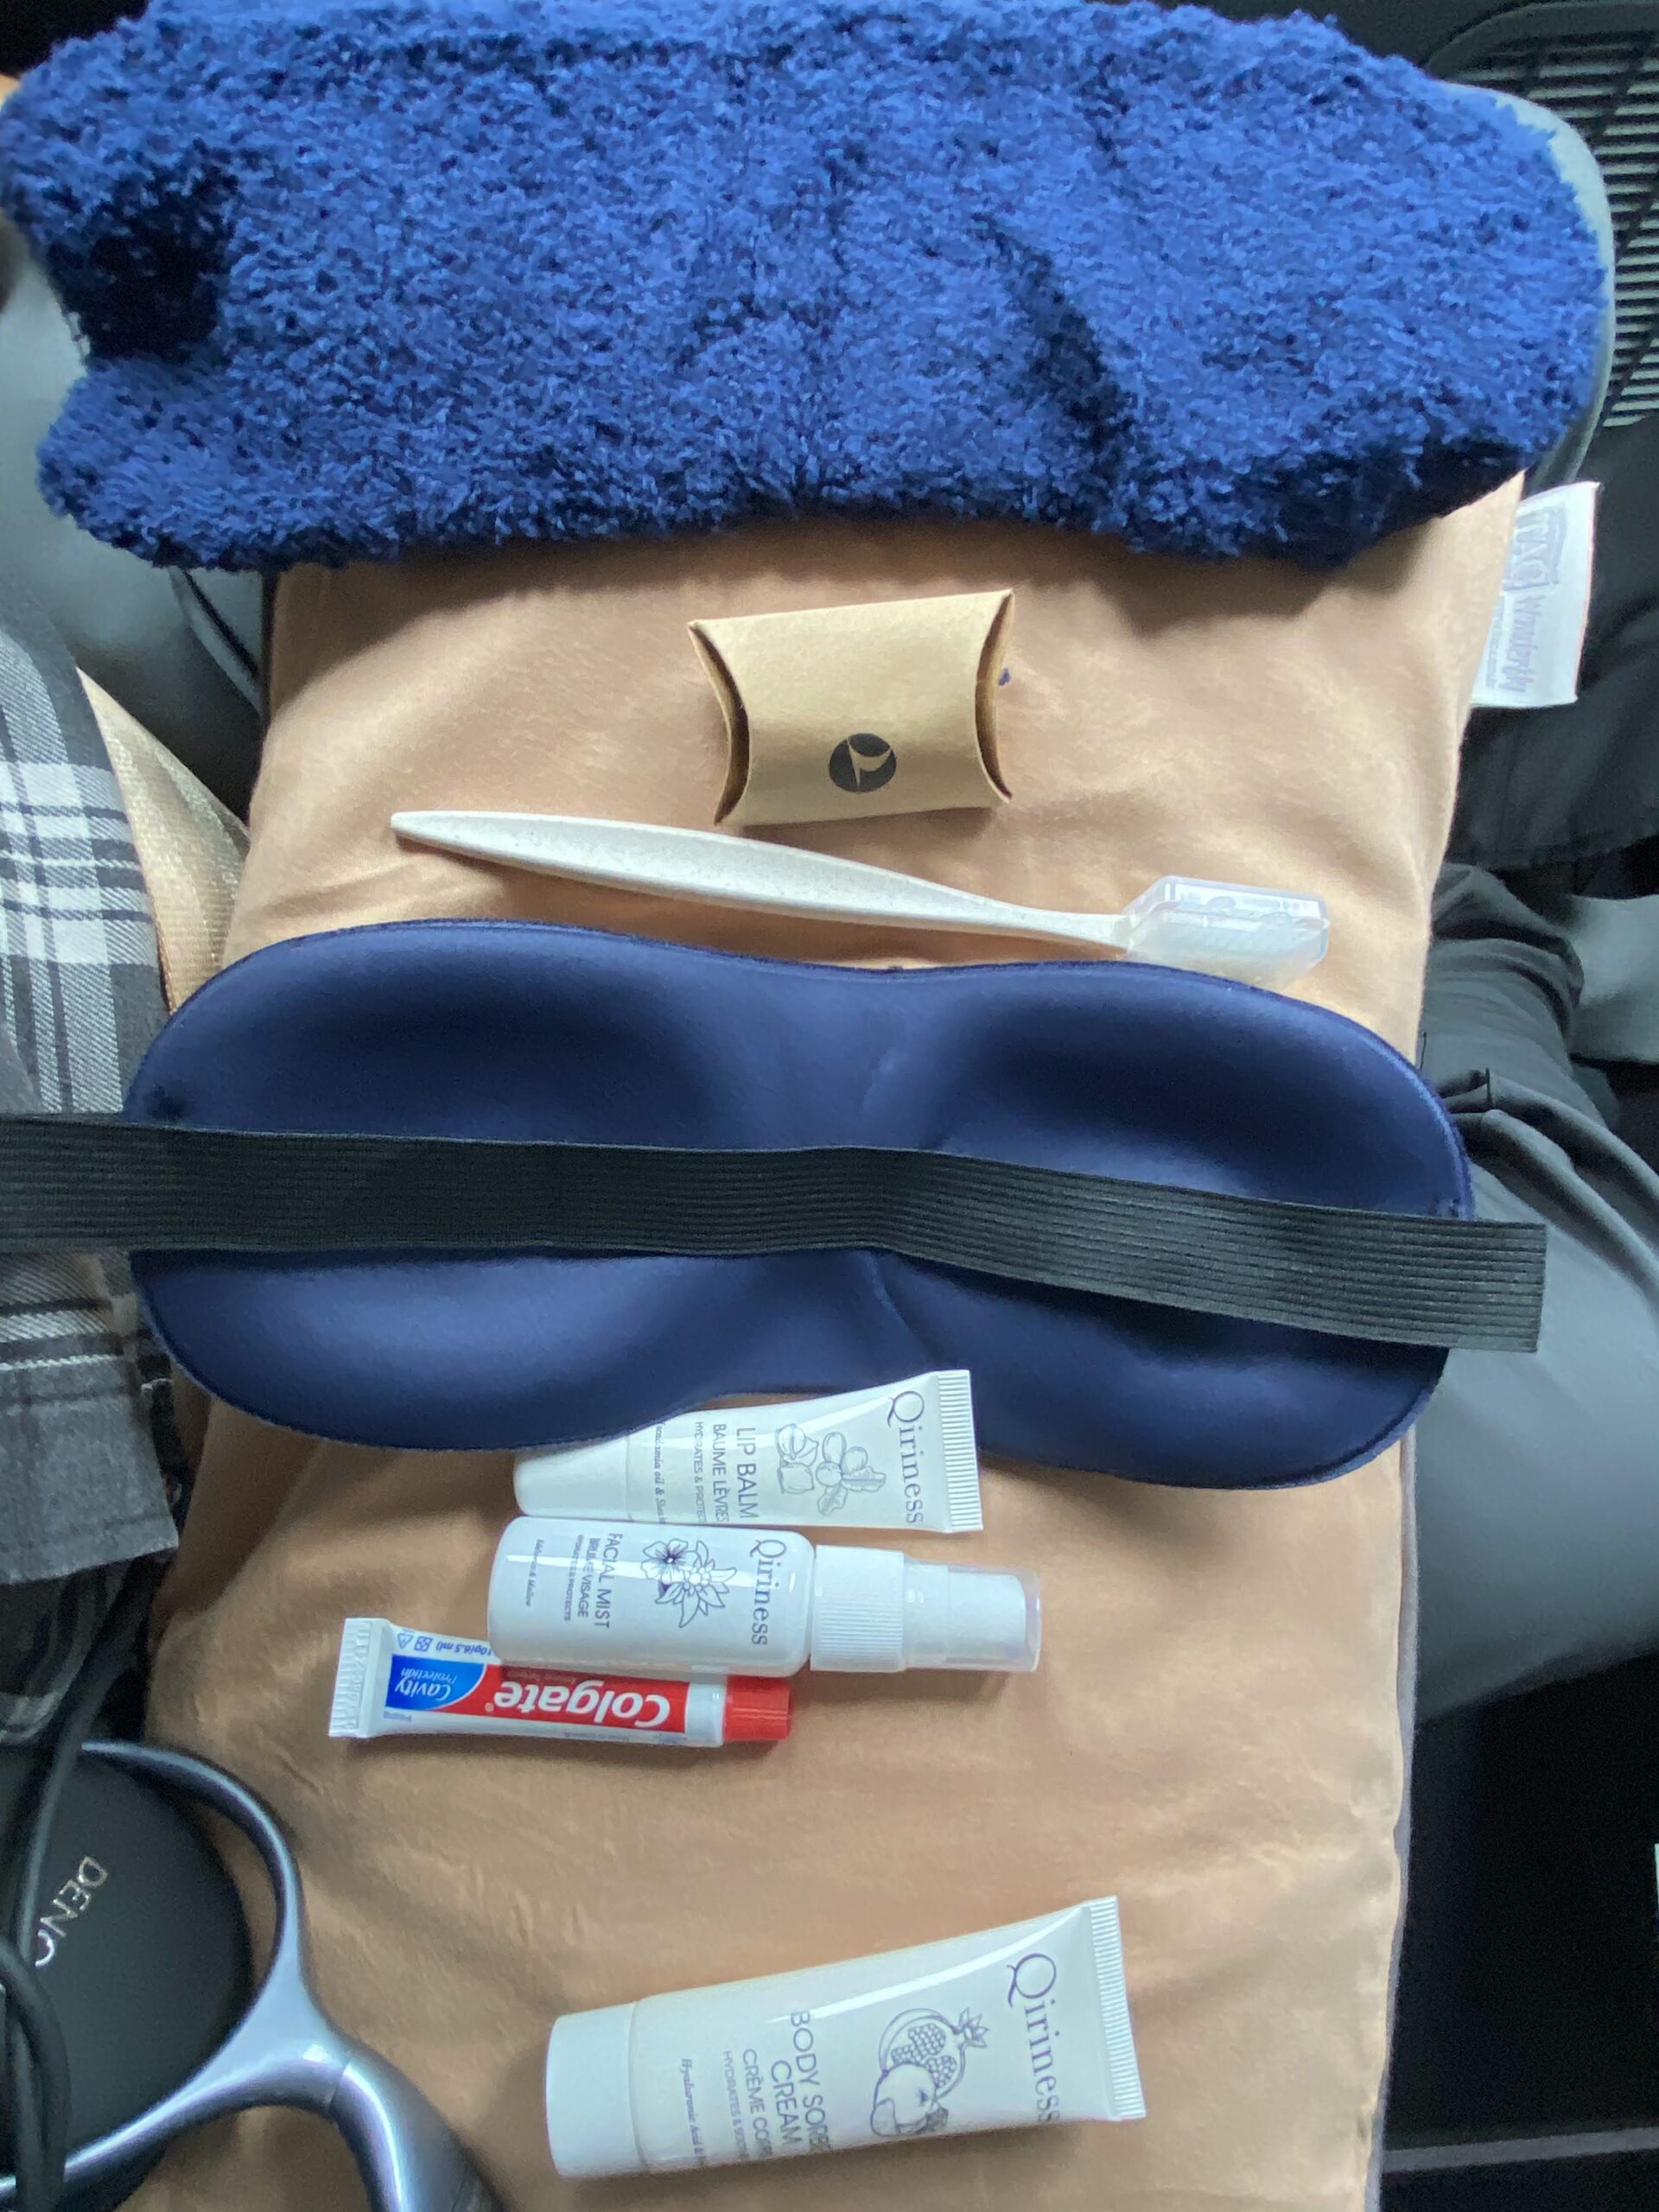 a sleeping mask and other items on a pillow